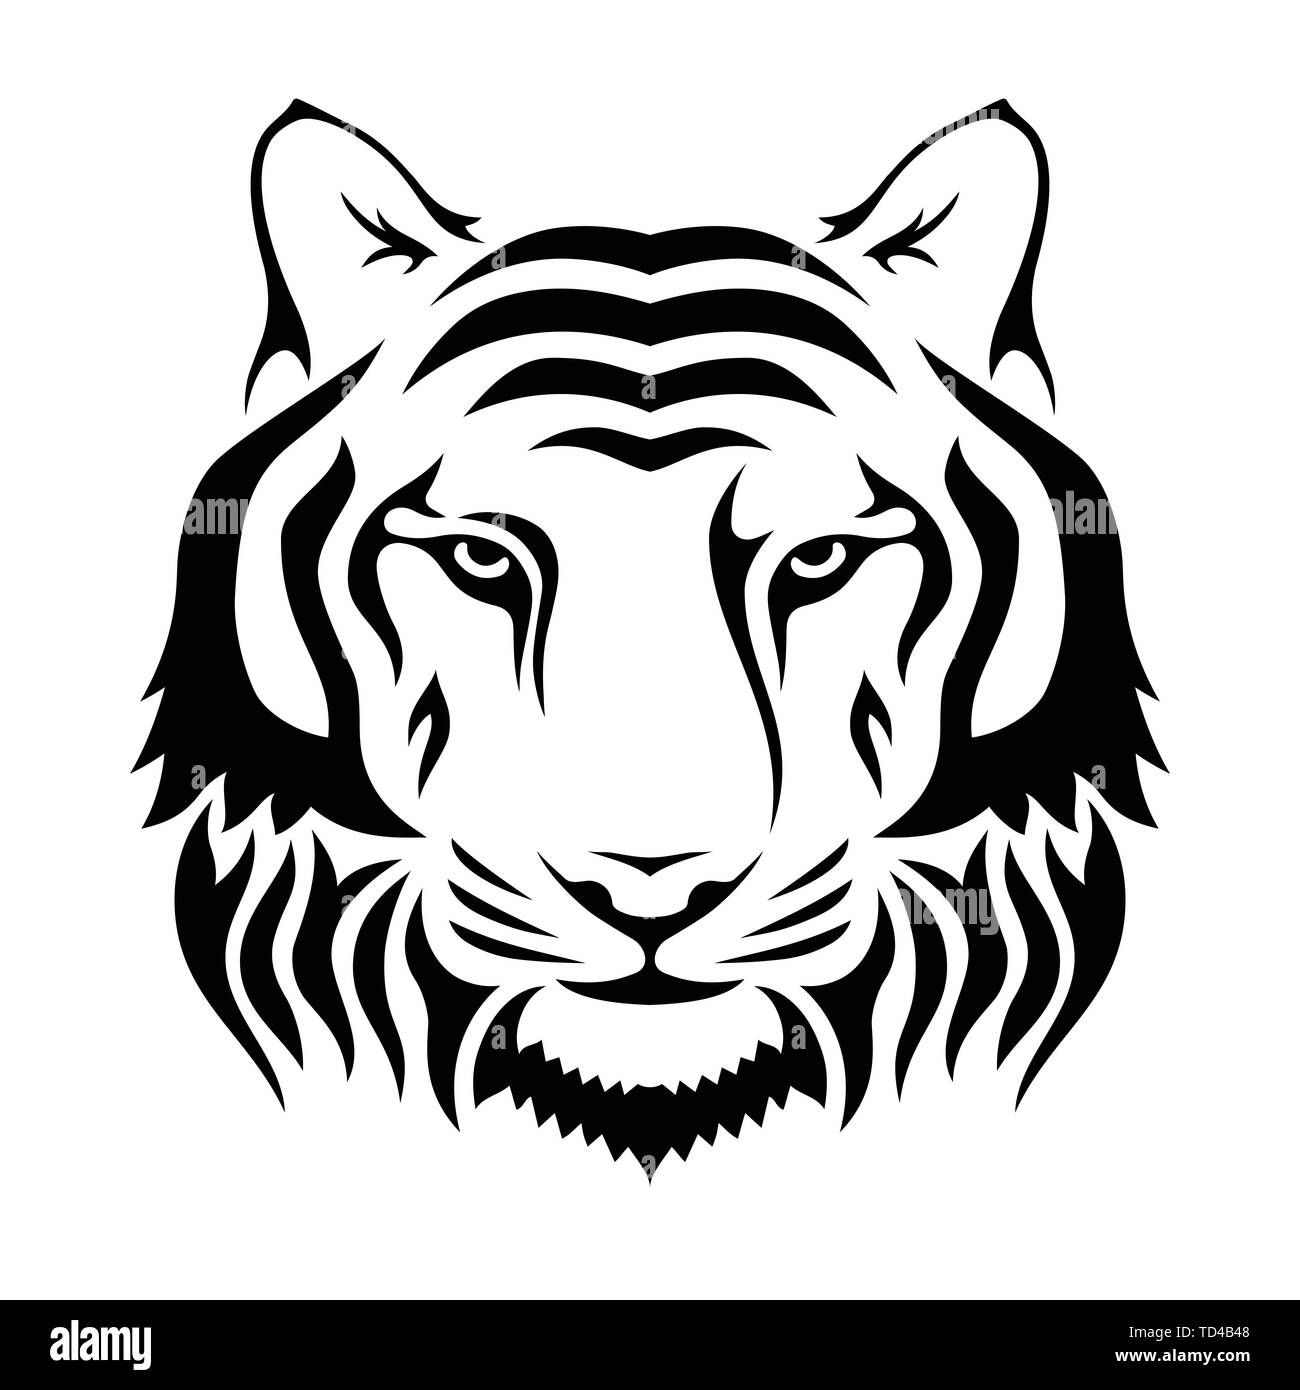 Muzzle of a tiger isolated on wgite background. Tiger's head silhouette. Logo, emblem template. Symbol for business or shirt design. Vector. Stock Vector